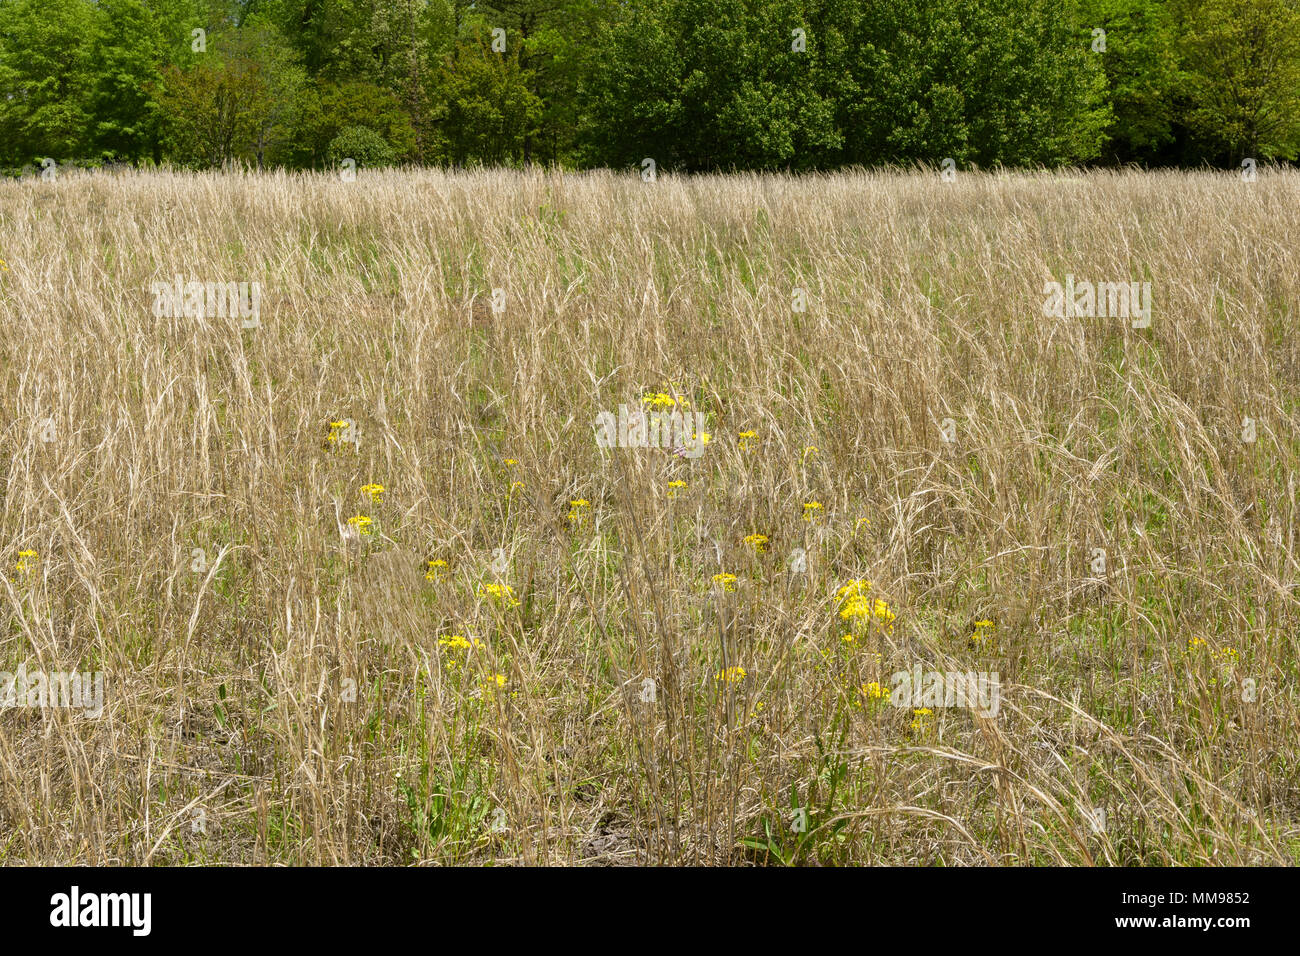 Rye grass and yellow dandelions in foreground, green trees in background. Stock Photo